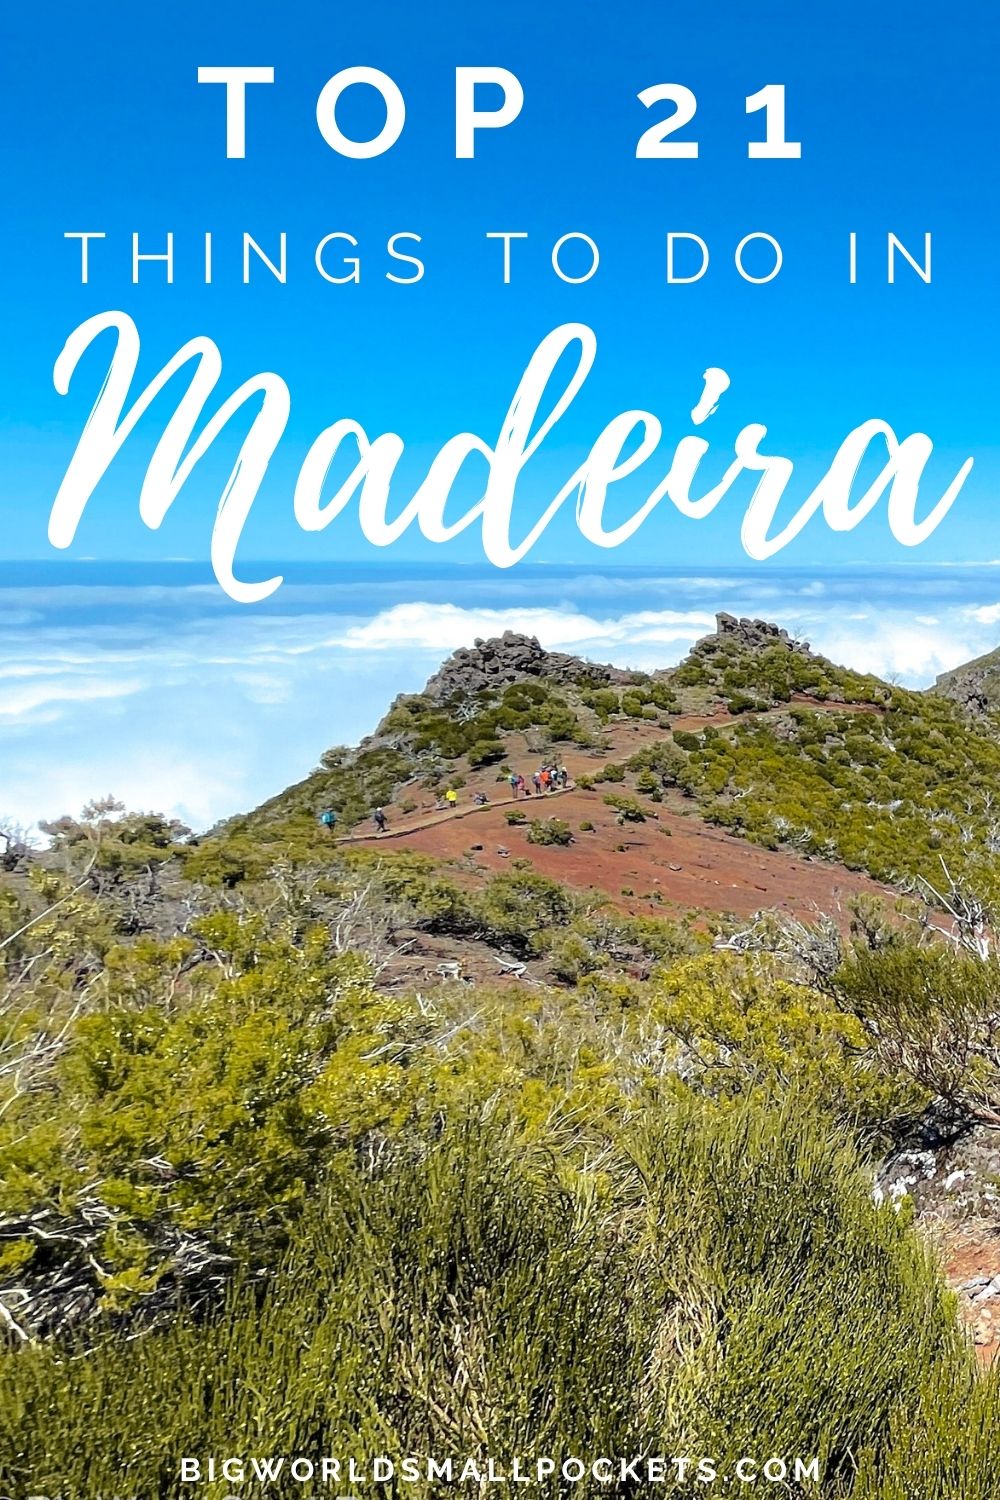 Top 21 Things to Do in Madeira